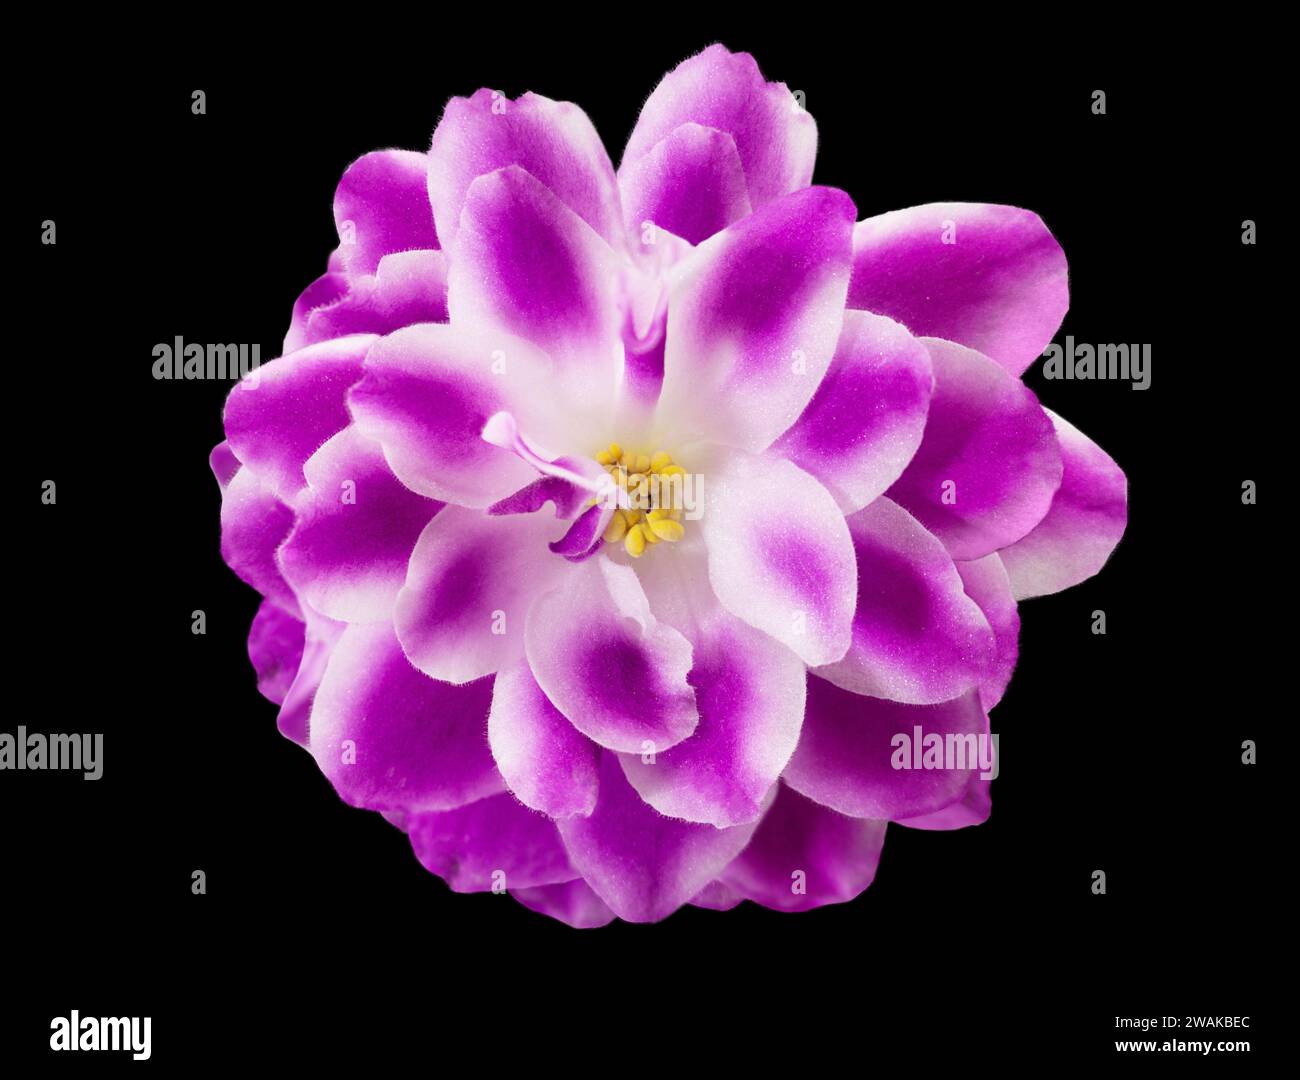 Purple pink violet with petals and stamen on black isolated background. View from above Stock Photo